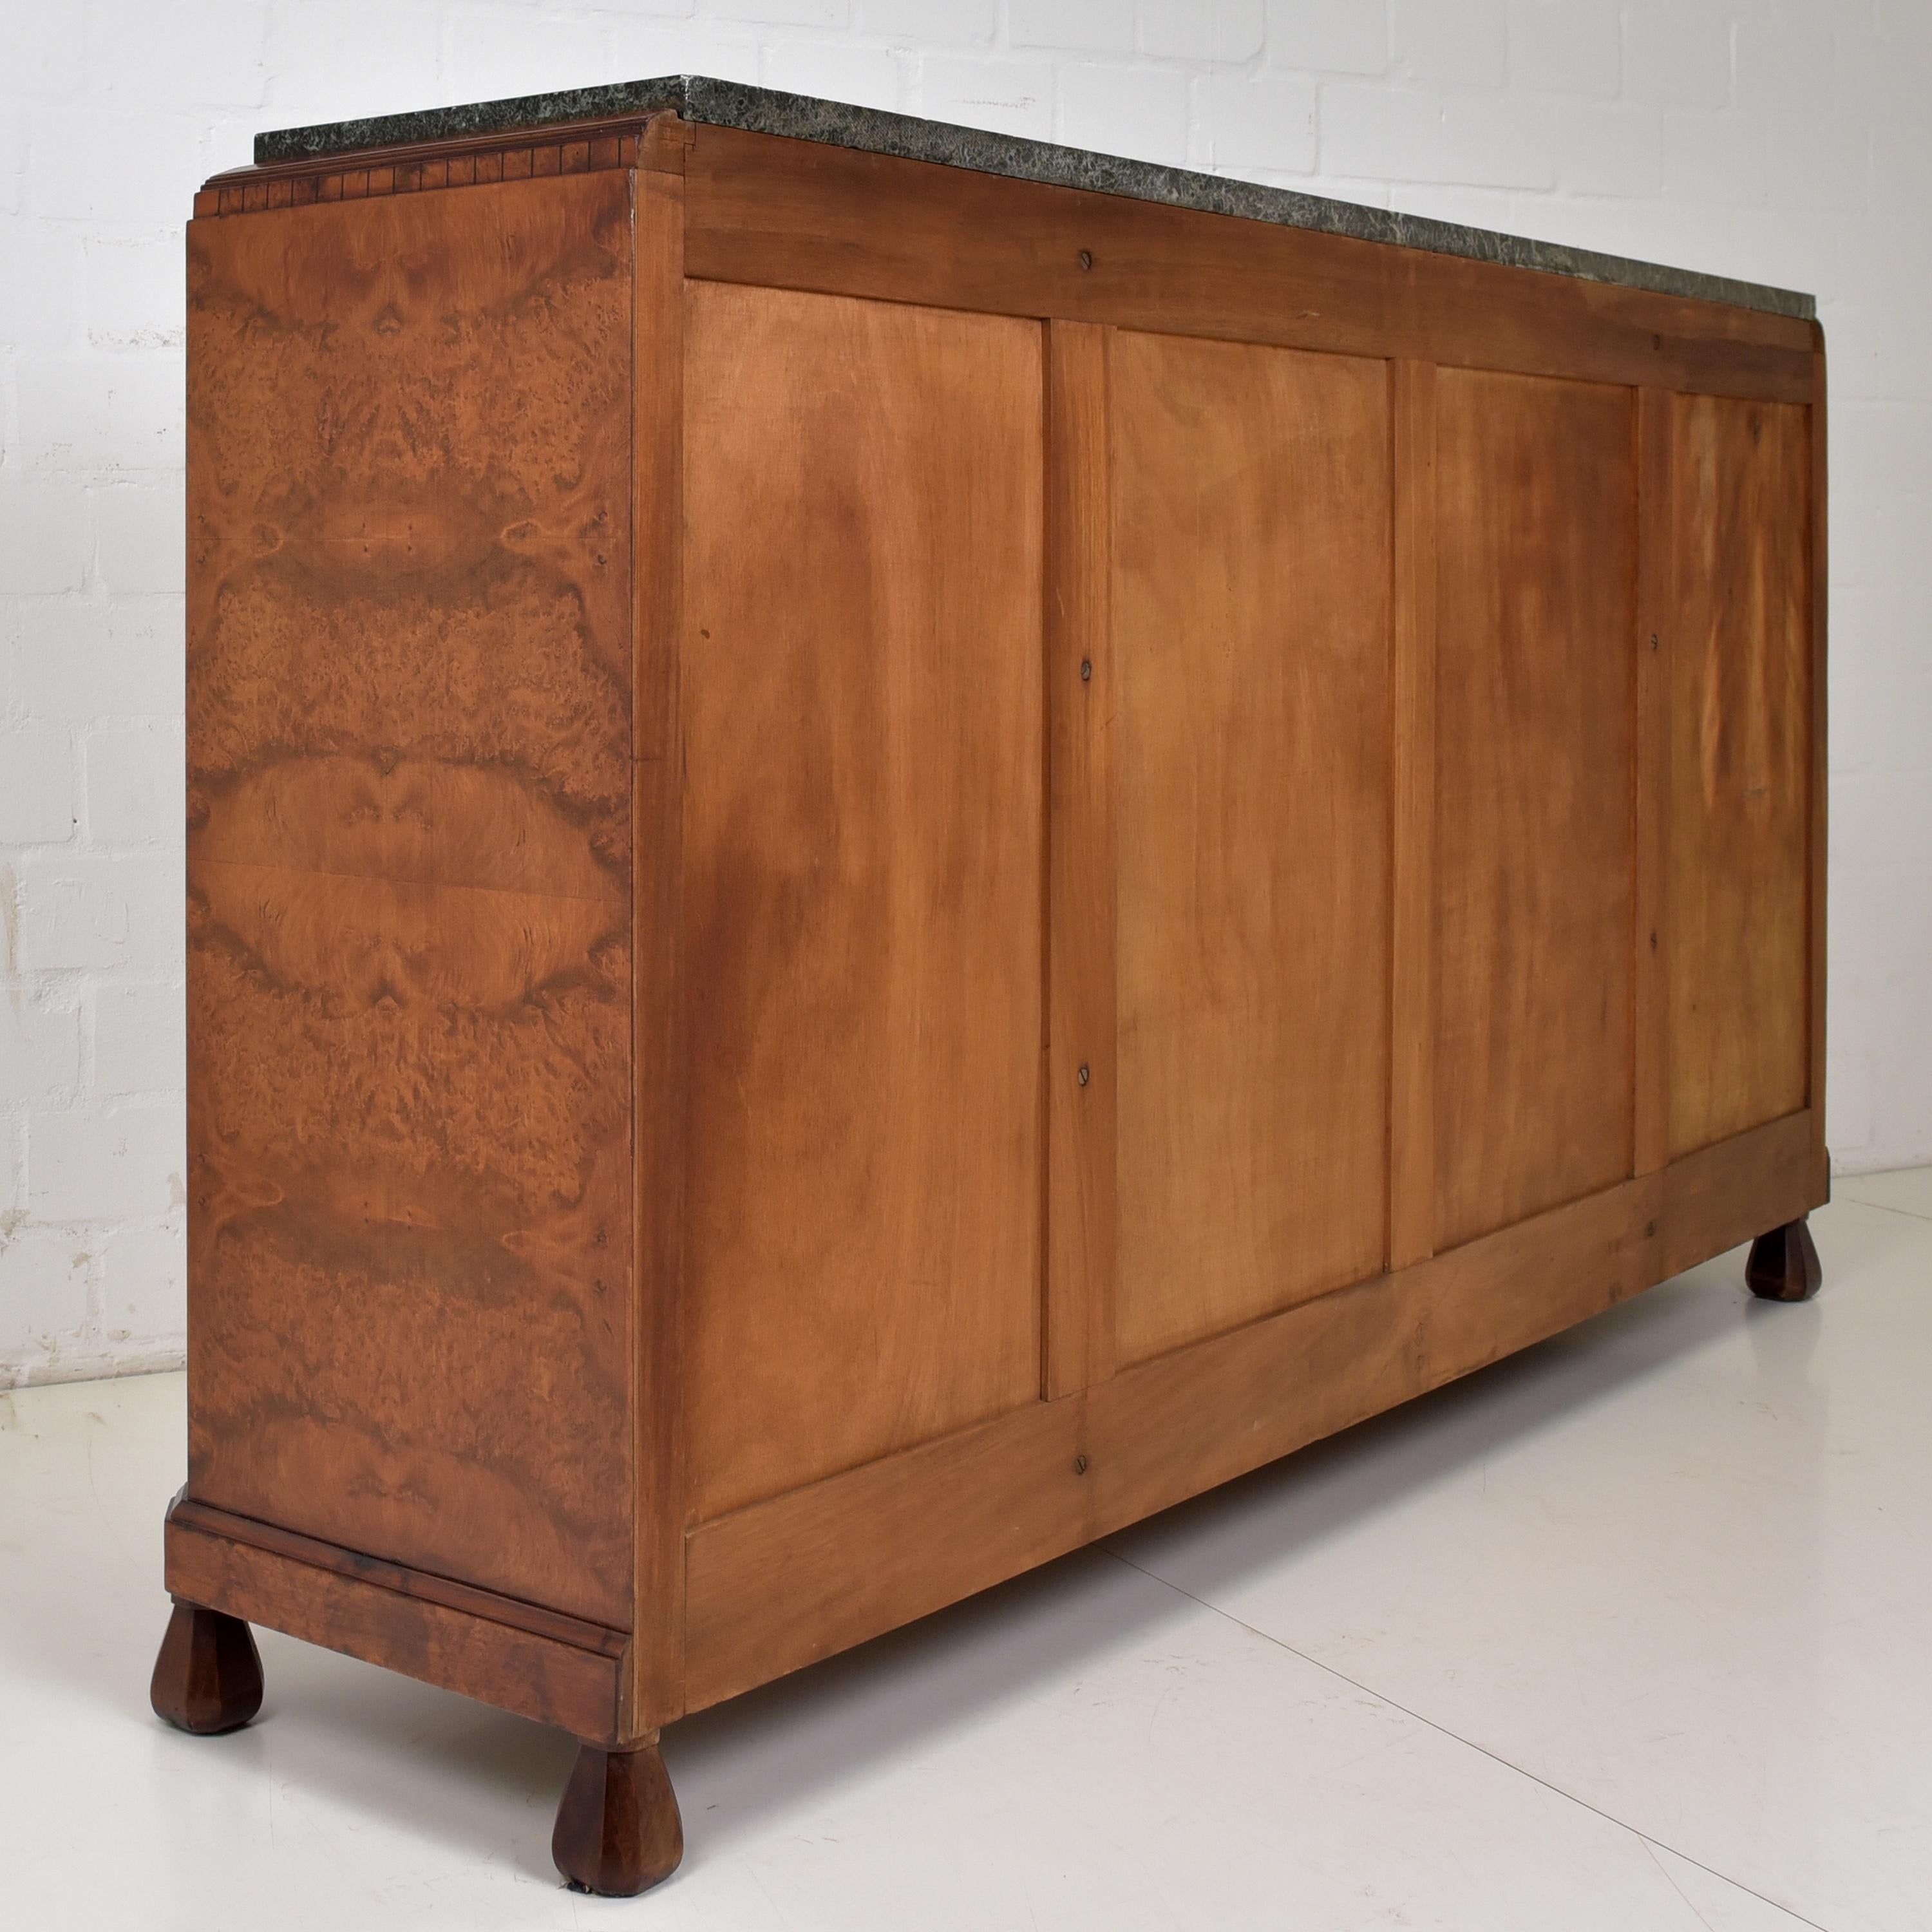 Art Deco XL Showcase Sideboard in Root Wood, 1930 For Sale 7